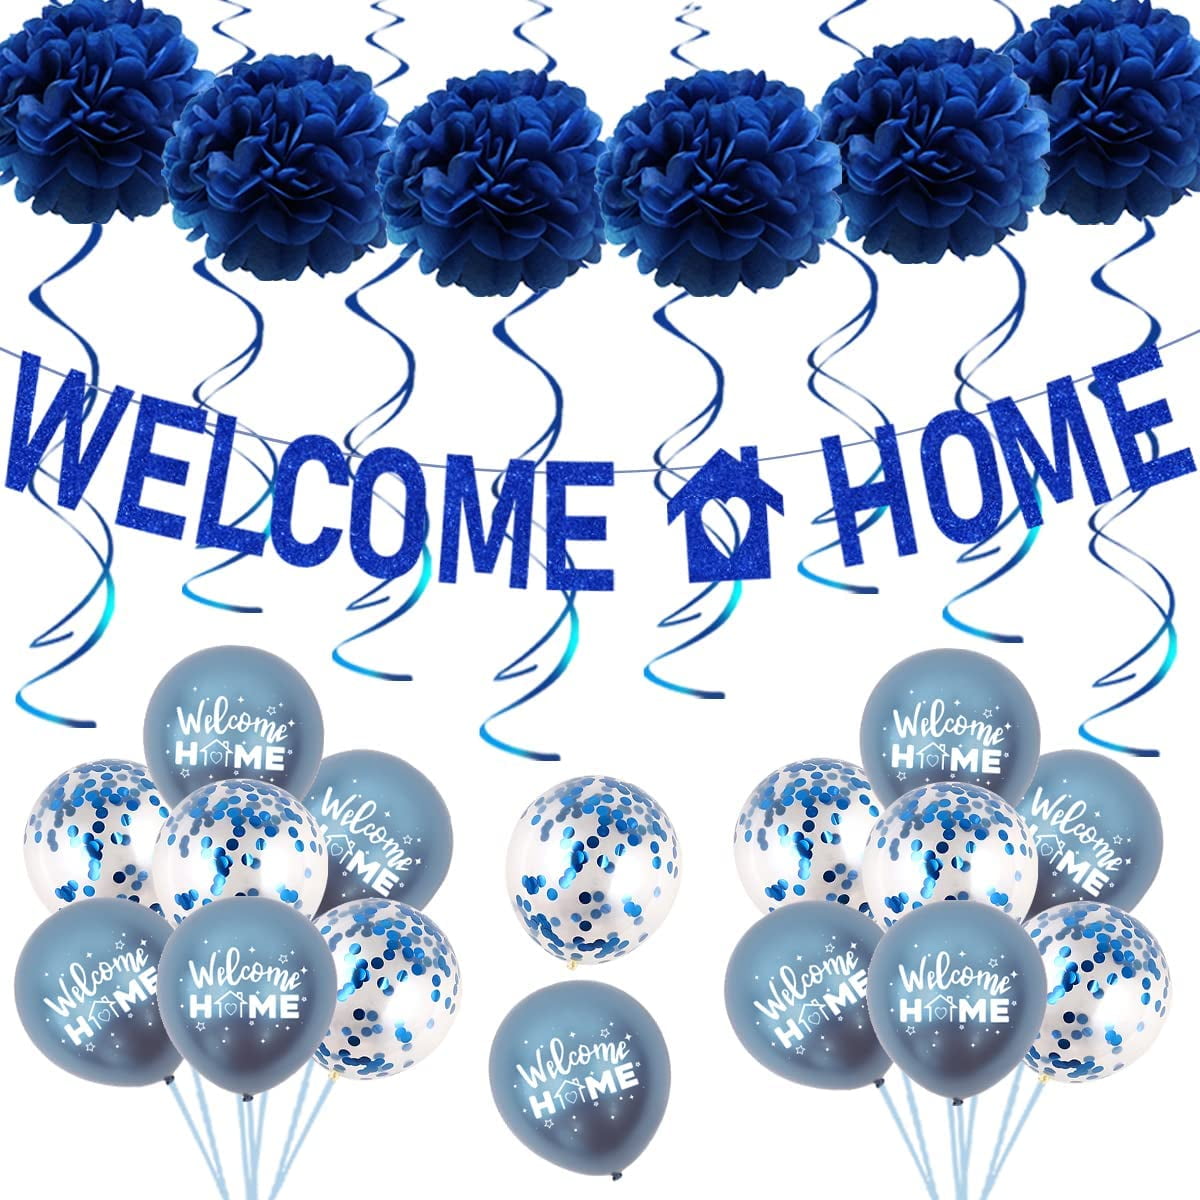 Welcome Home Balloons Decorations Blue Welcome Home Party Supplies ...